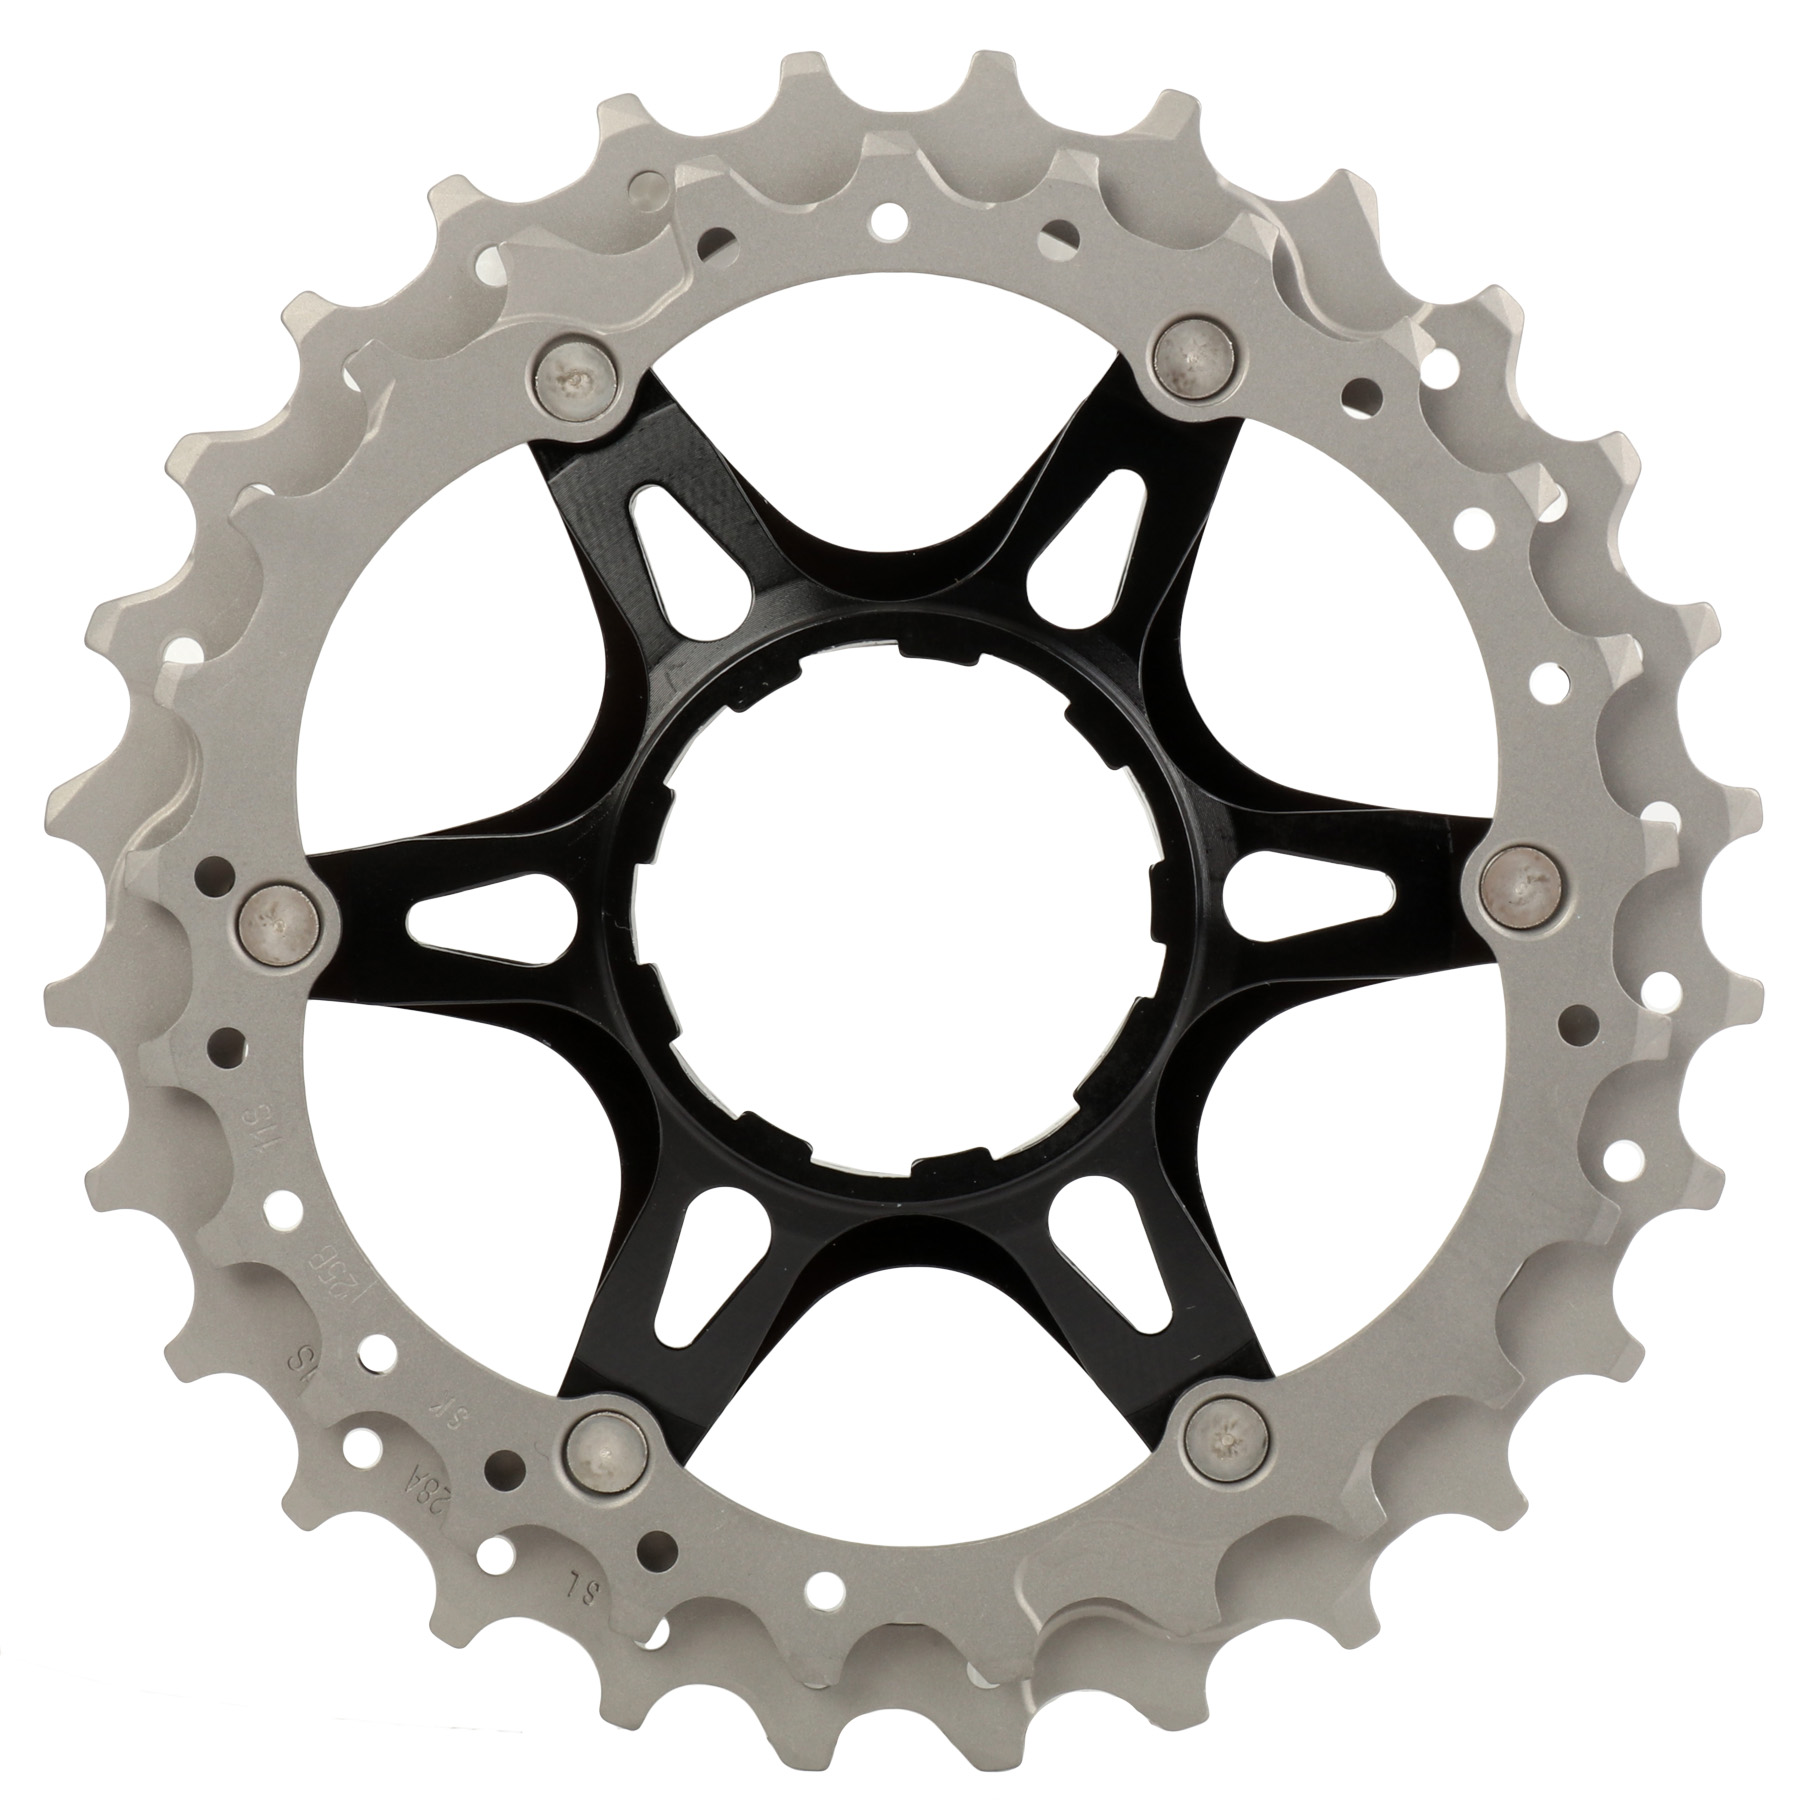 Picture of Shimano Sprocket for Dura Ace 11-Speed Cassette - 11-28 T for 25-28 (Y1YC98090) - CS-9000